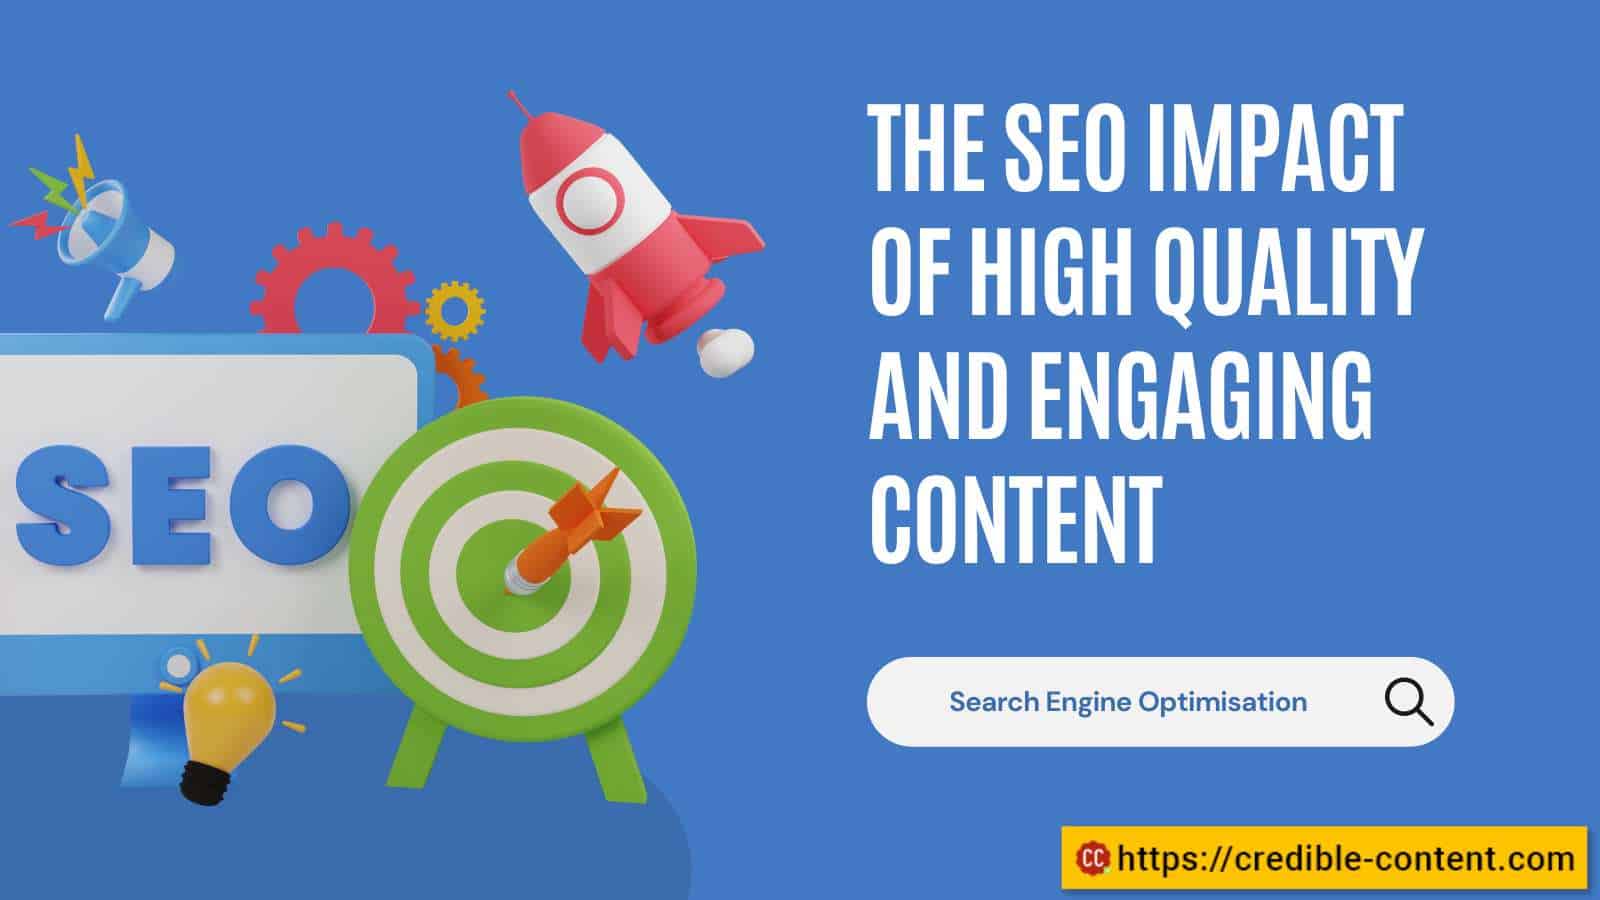 The SEO impact of high quality and engaging content